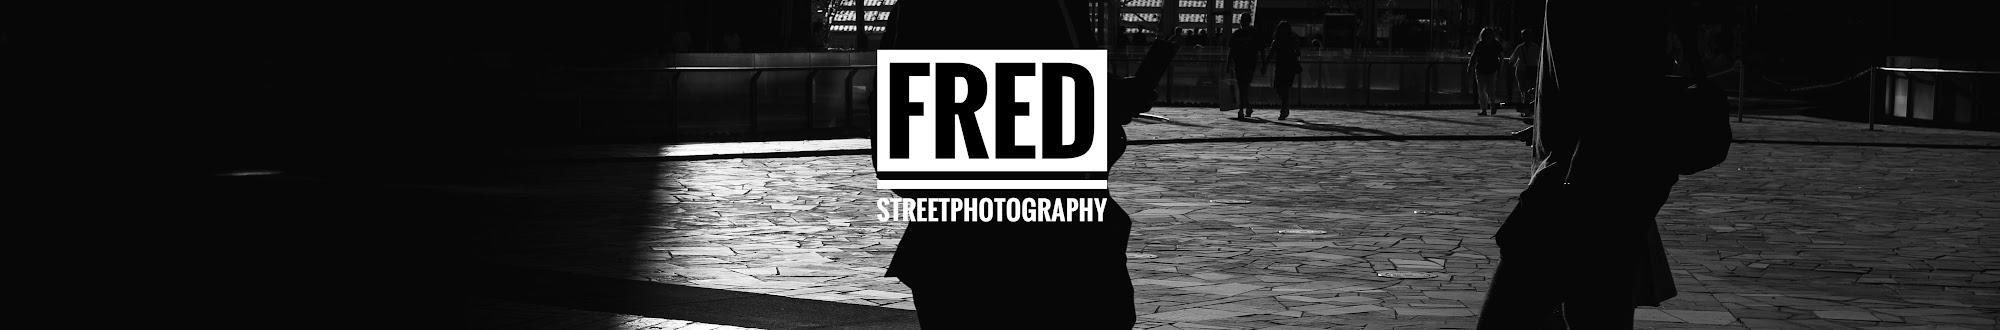 Fred Street Photography